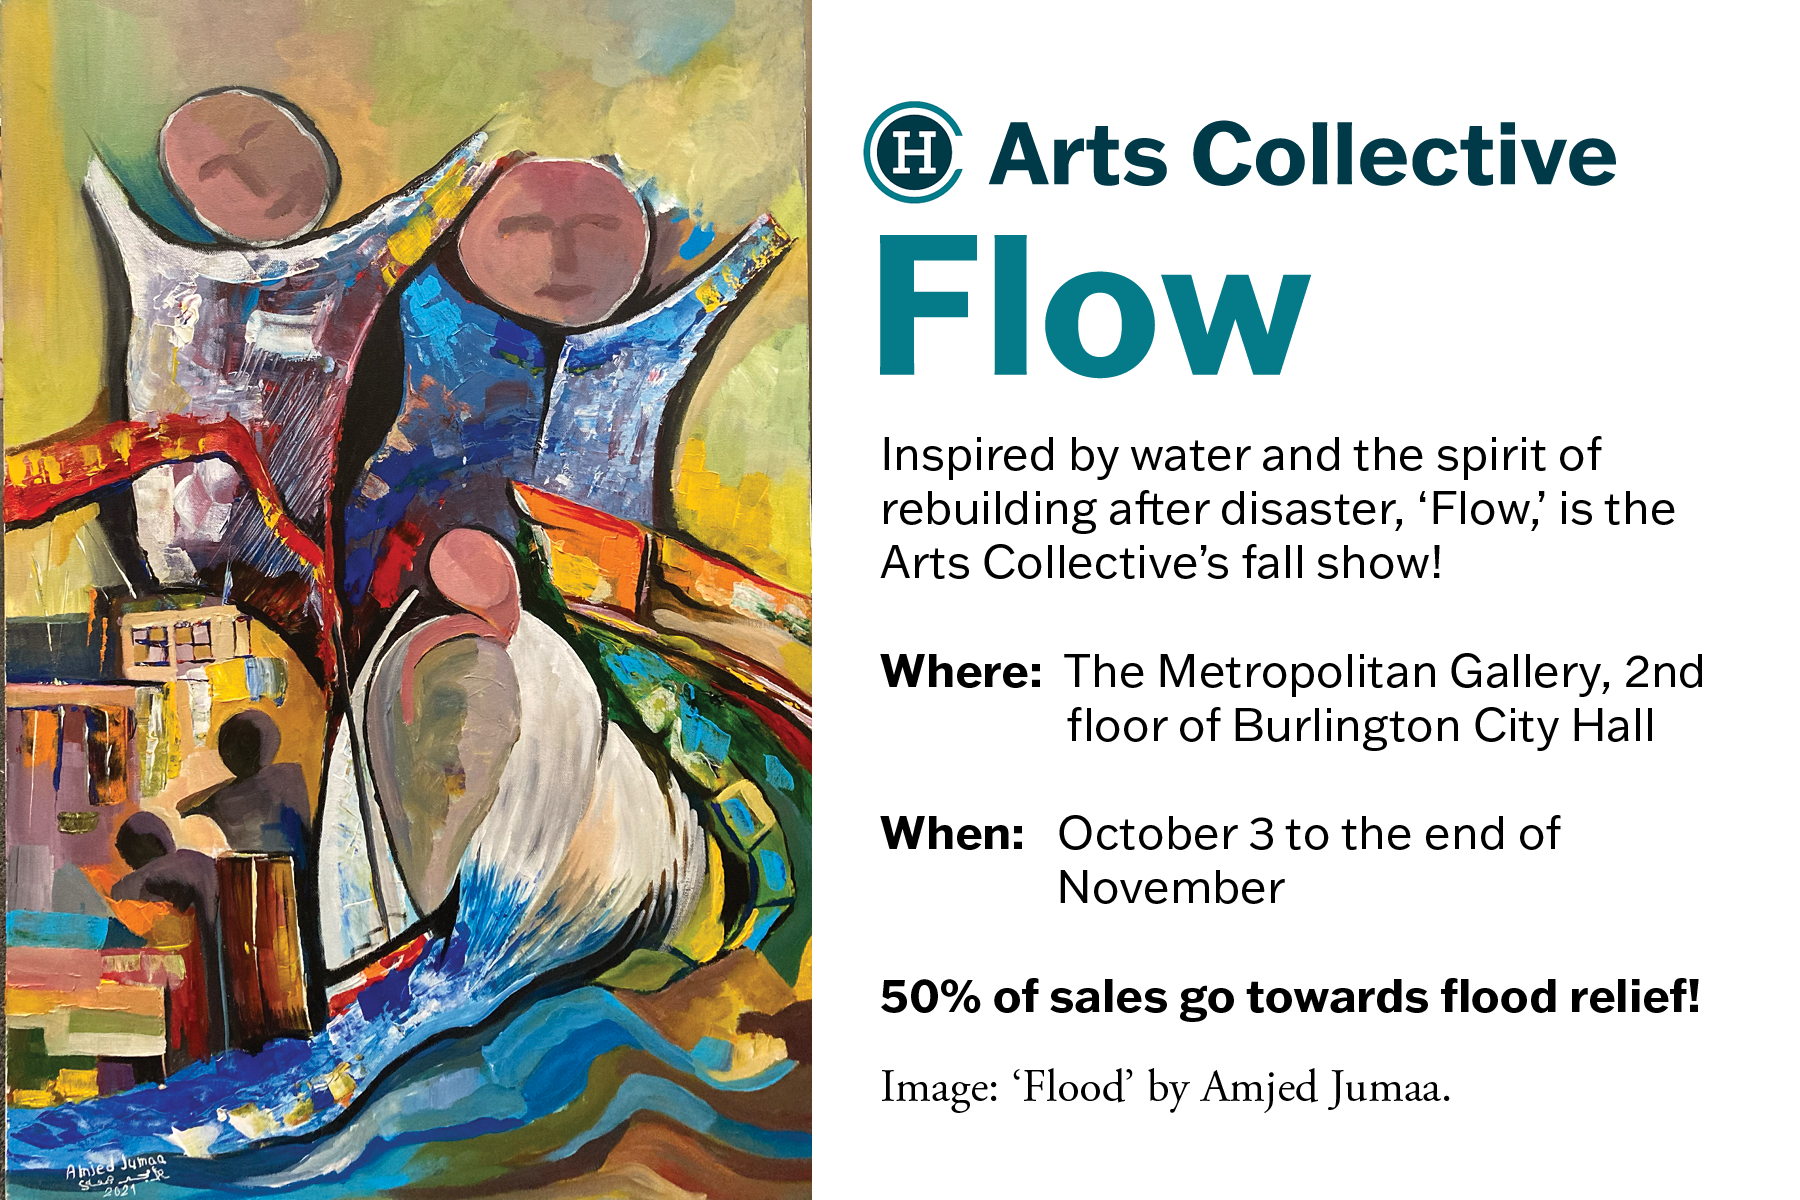 Flow Inspired by water and the spirit of rebuilding after disaster, 'Flow,' is the Arts Collective's fall show! Where: The Metropolitan Gallery, 2nd floor of Burlington City Hall When: October 3 to the end of November 50% of sales go towards flood recovery. Image: 'Flood' by Amjed Jumaa